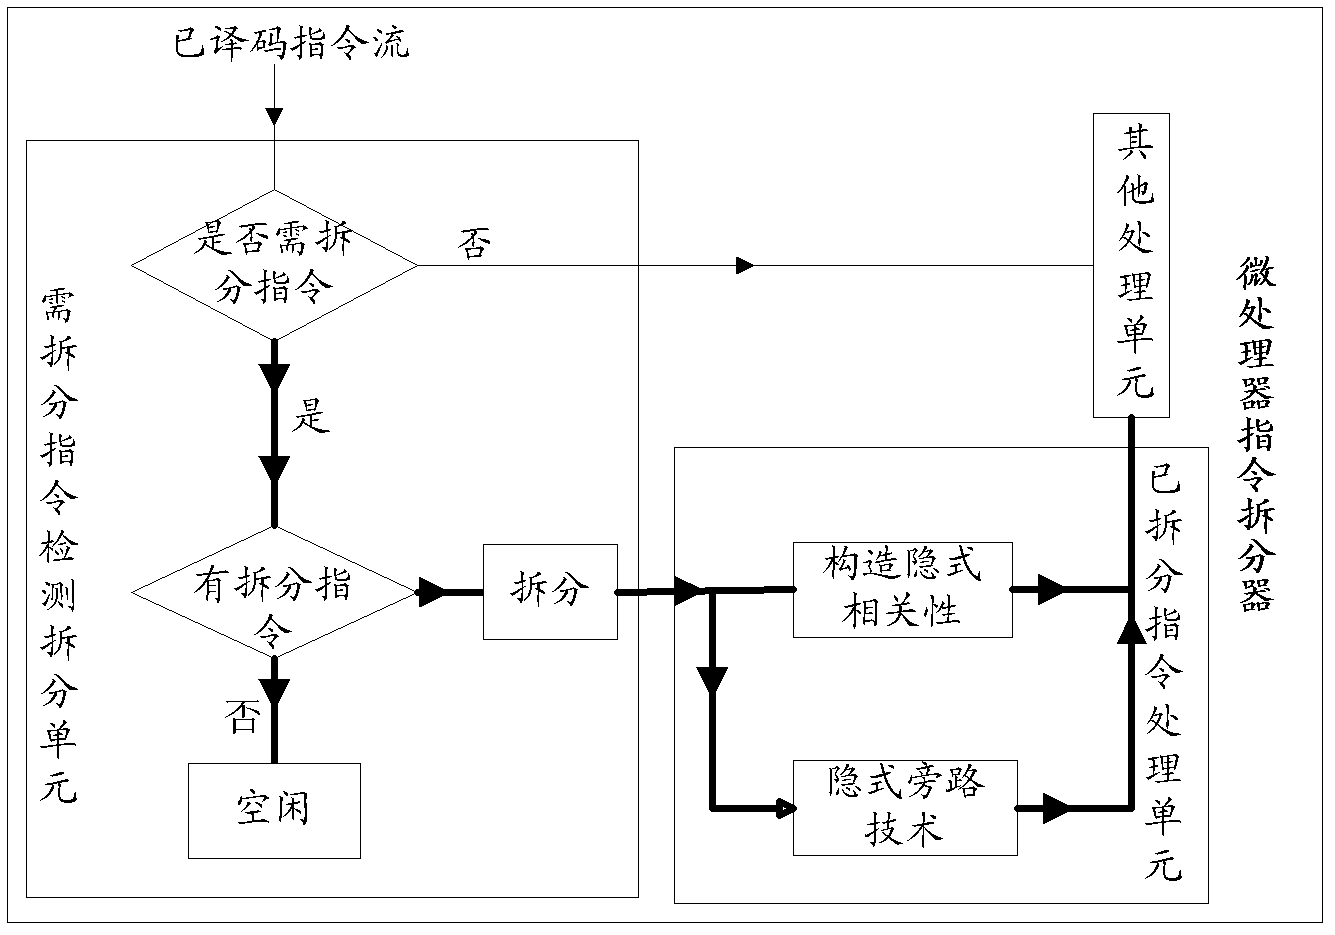 Microprocessor order split device based on implicit relevance and implicit bypass